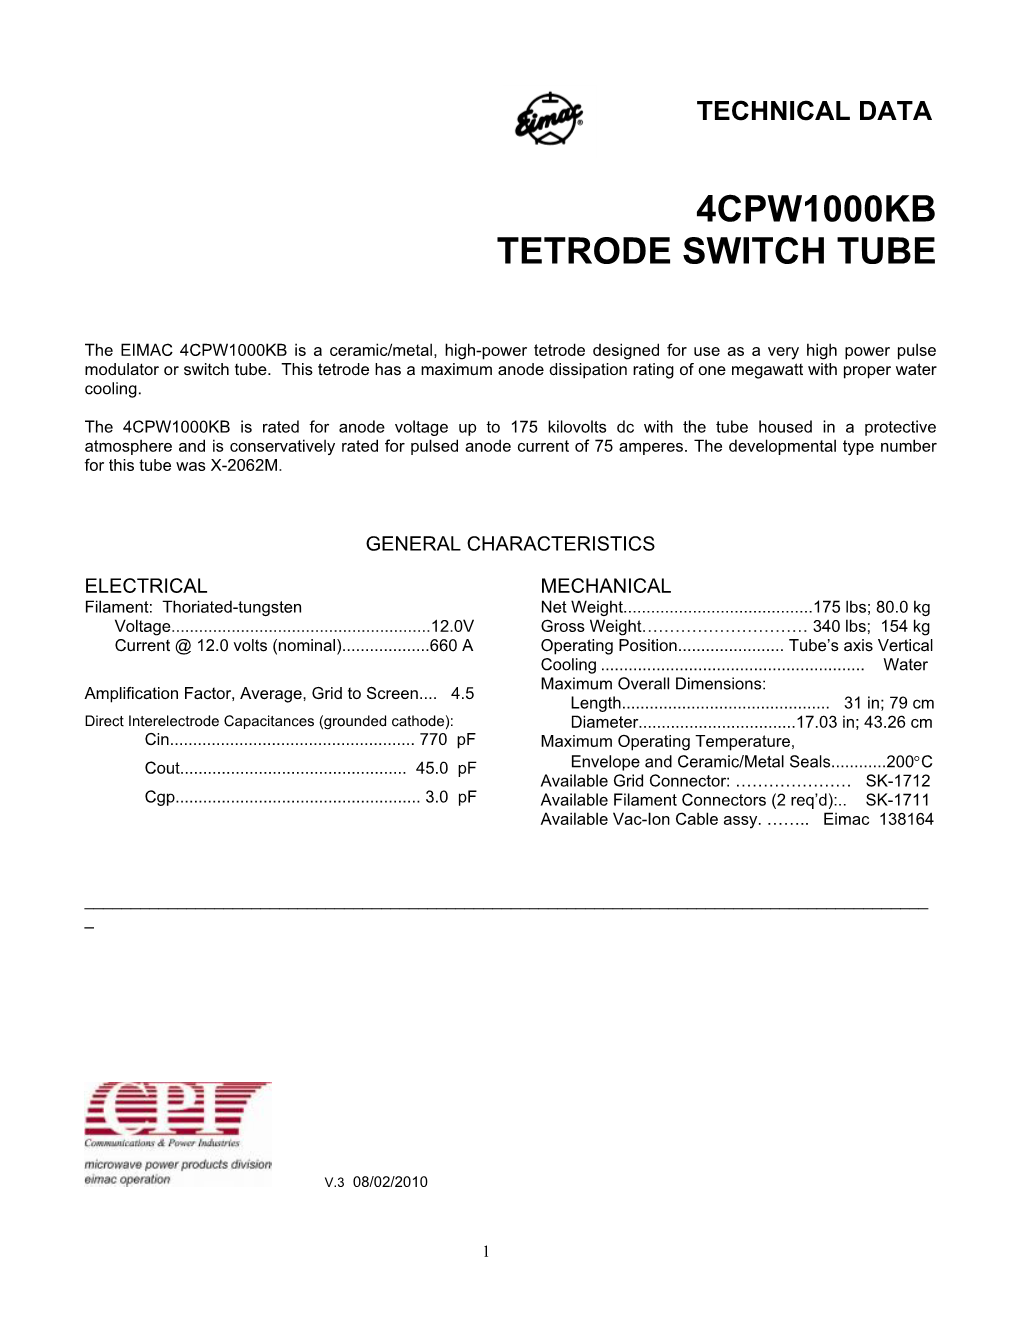 4Cpw1000kb Tetrode Switch Tube